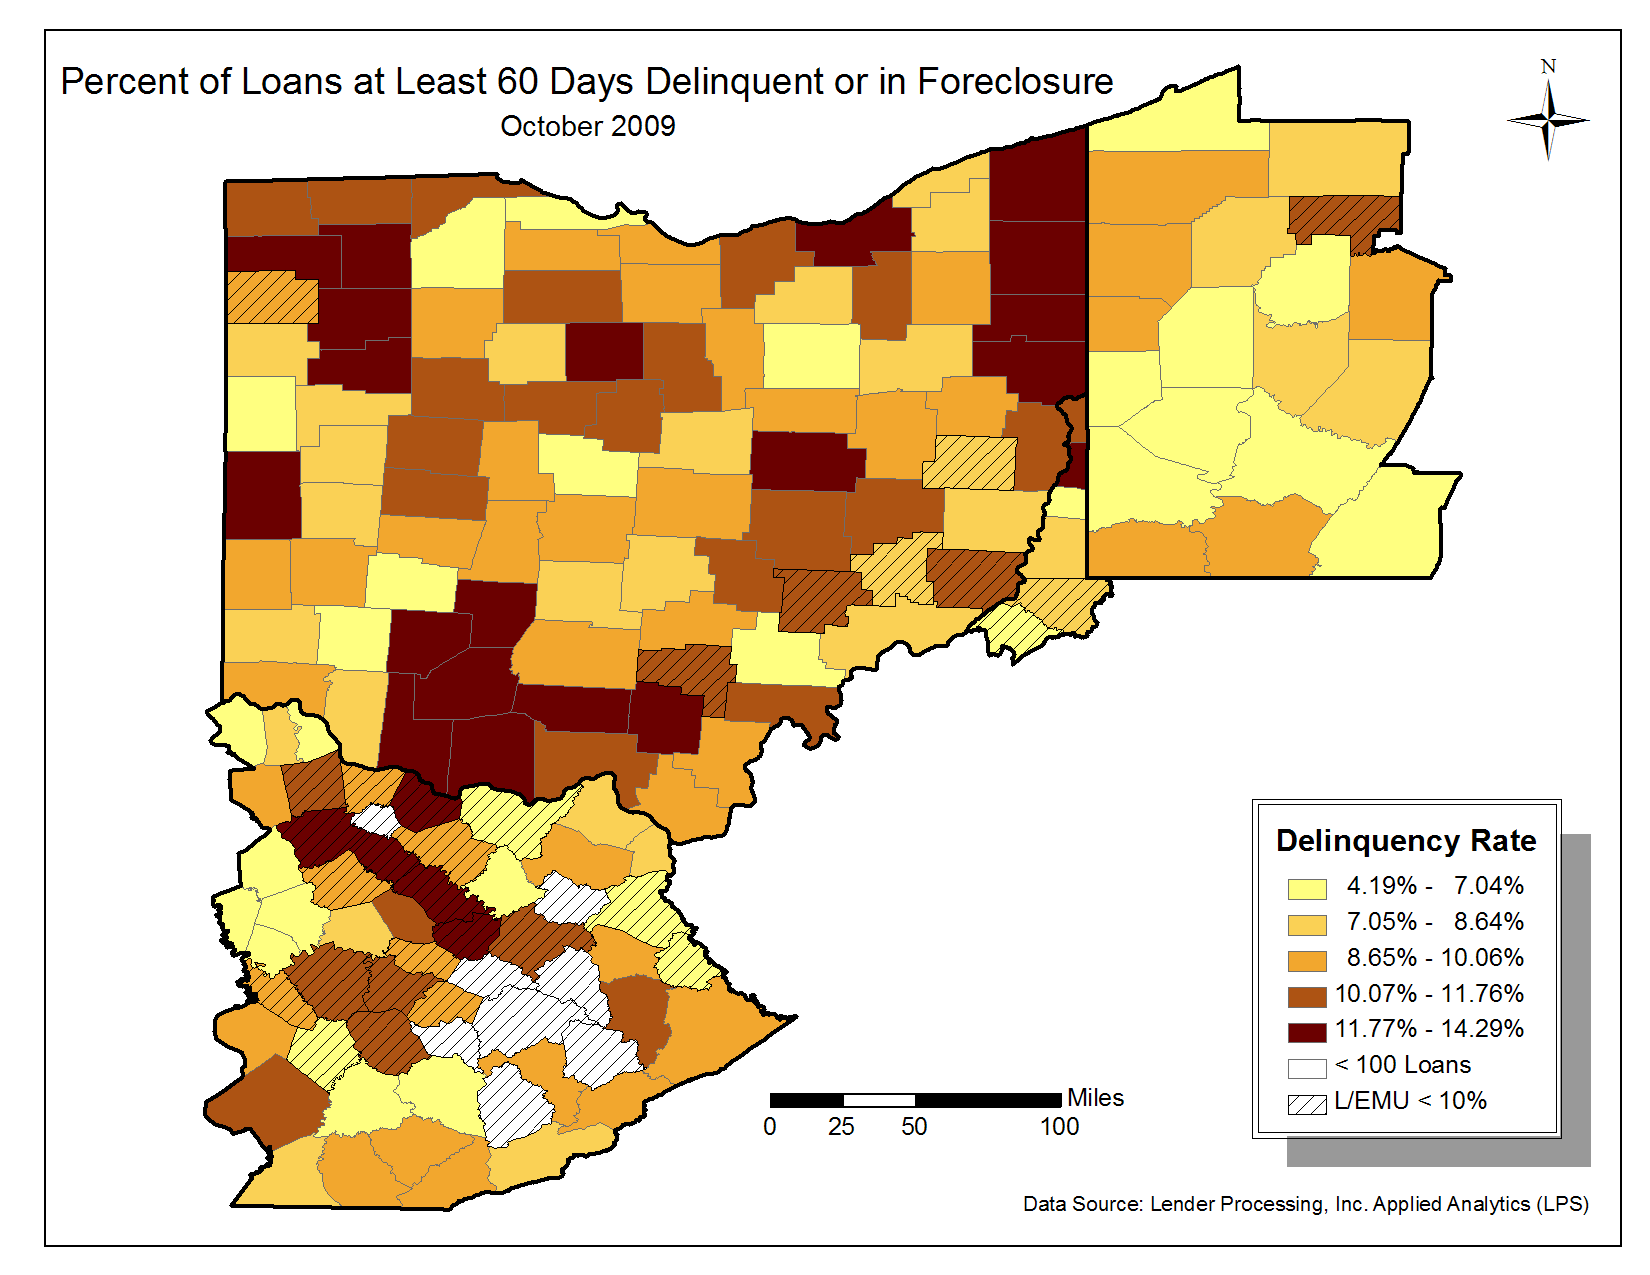 Figure 5: Percent of Loans at Least 60 Days Delinquent or in Foreclosure October 2009